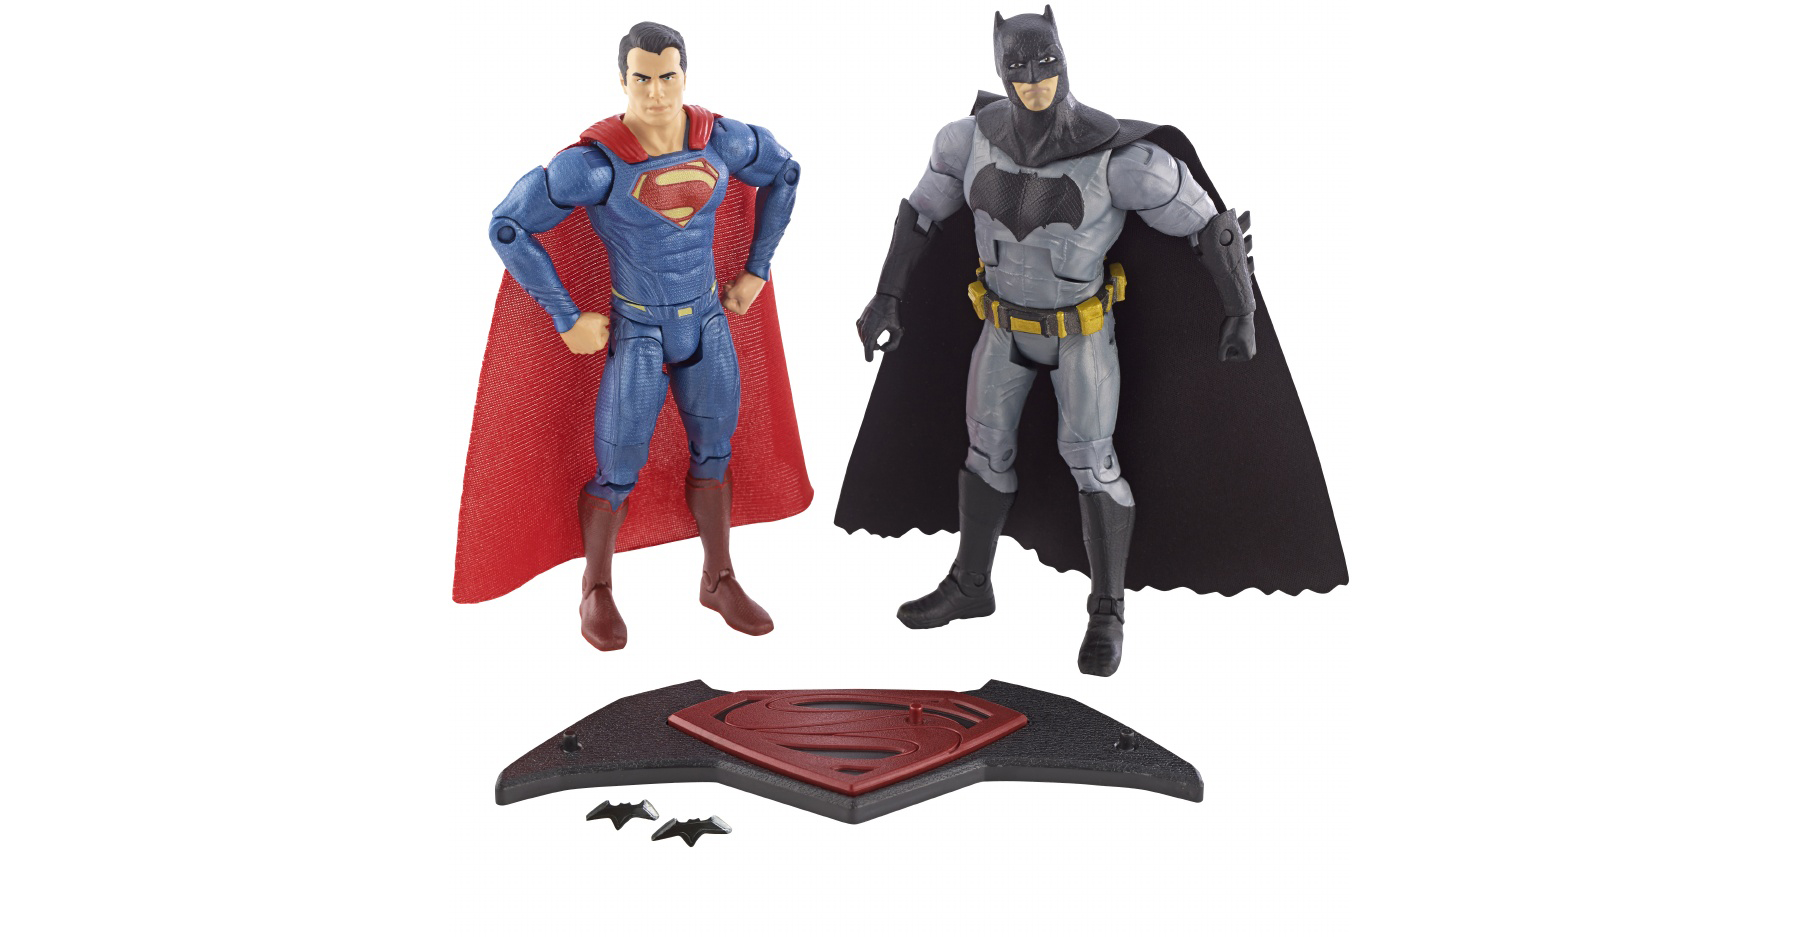 Your First Batman V. Superman Merch Will be at Comic-Con, Here's What You Can Bring Home